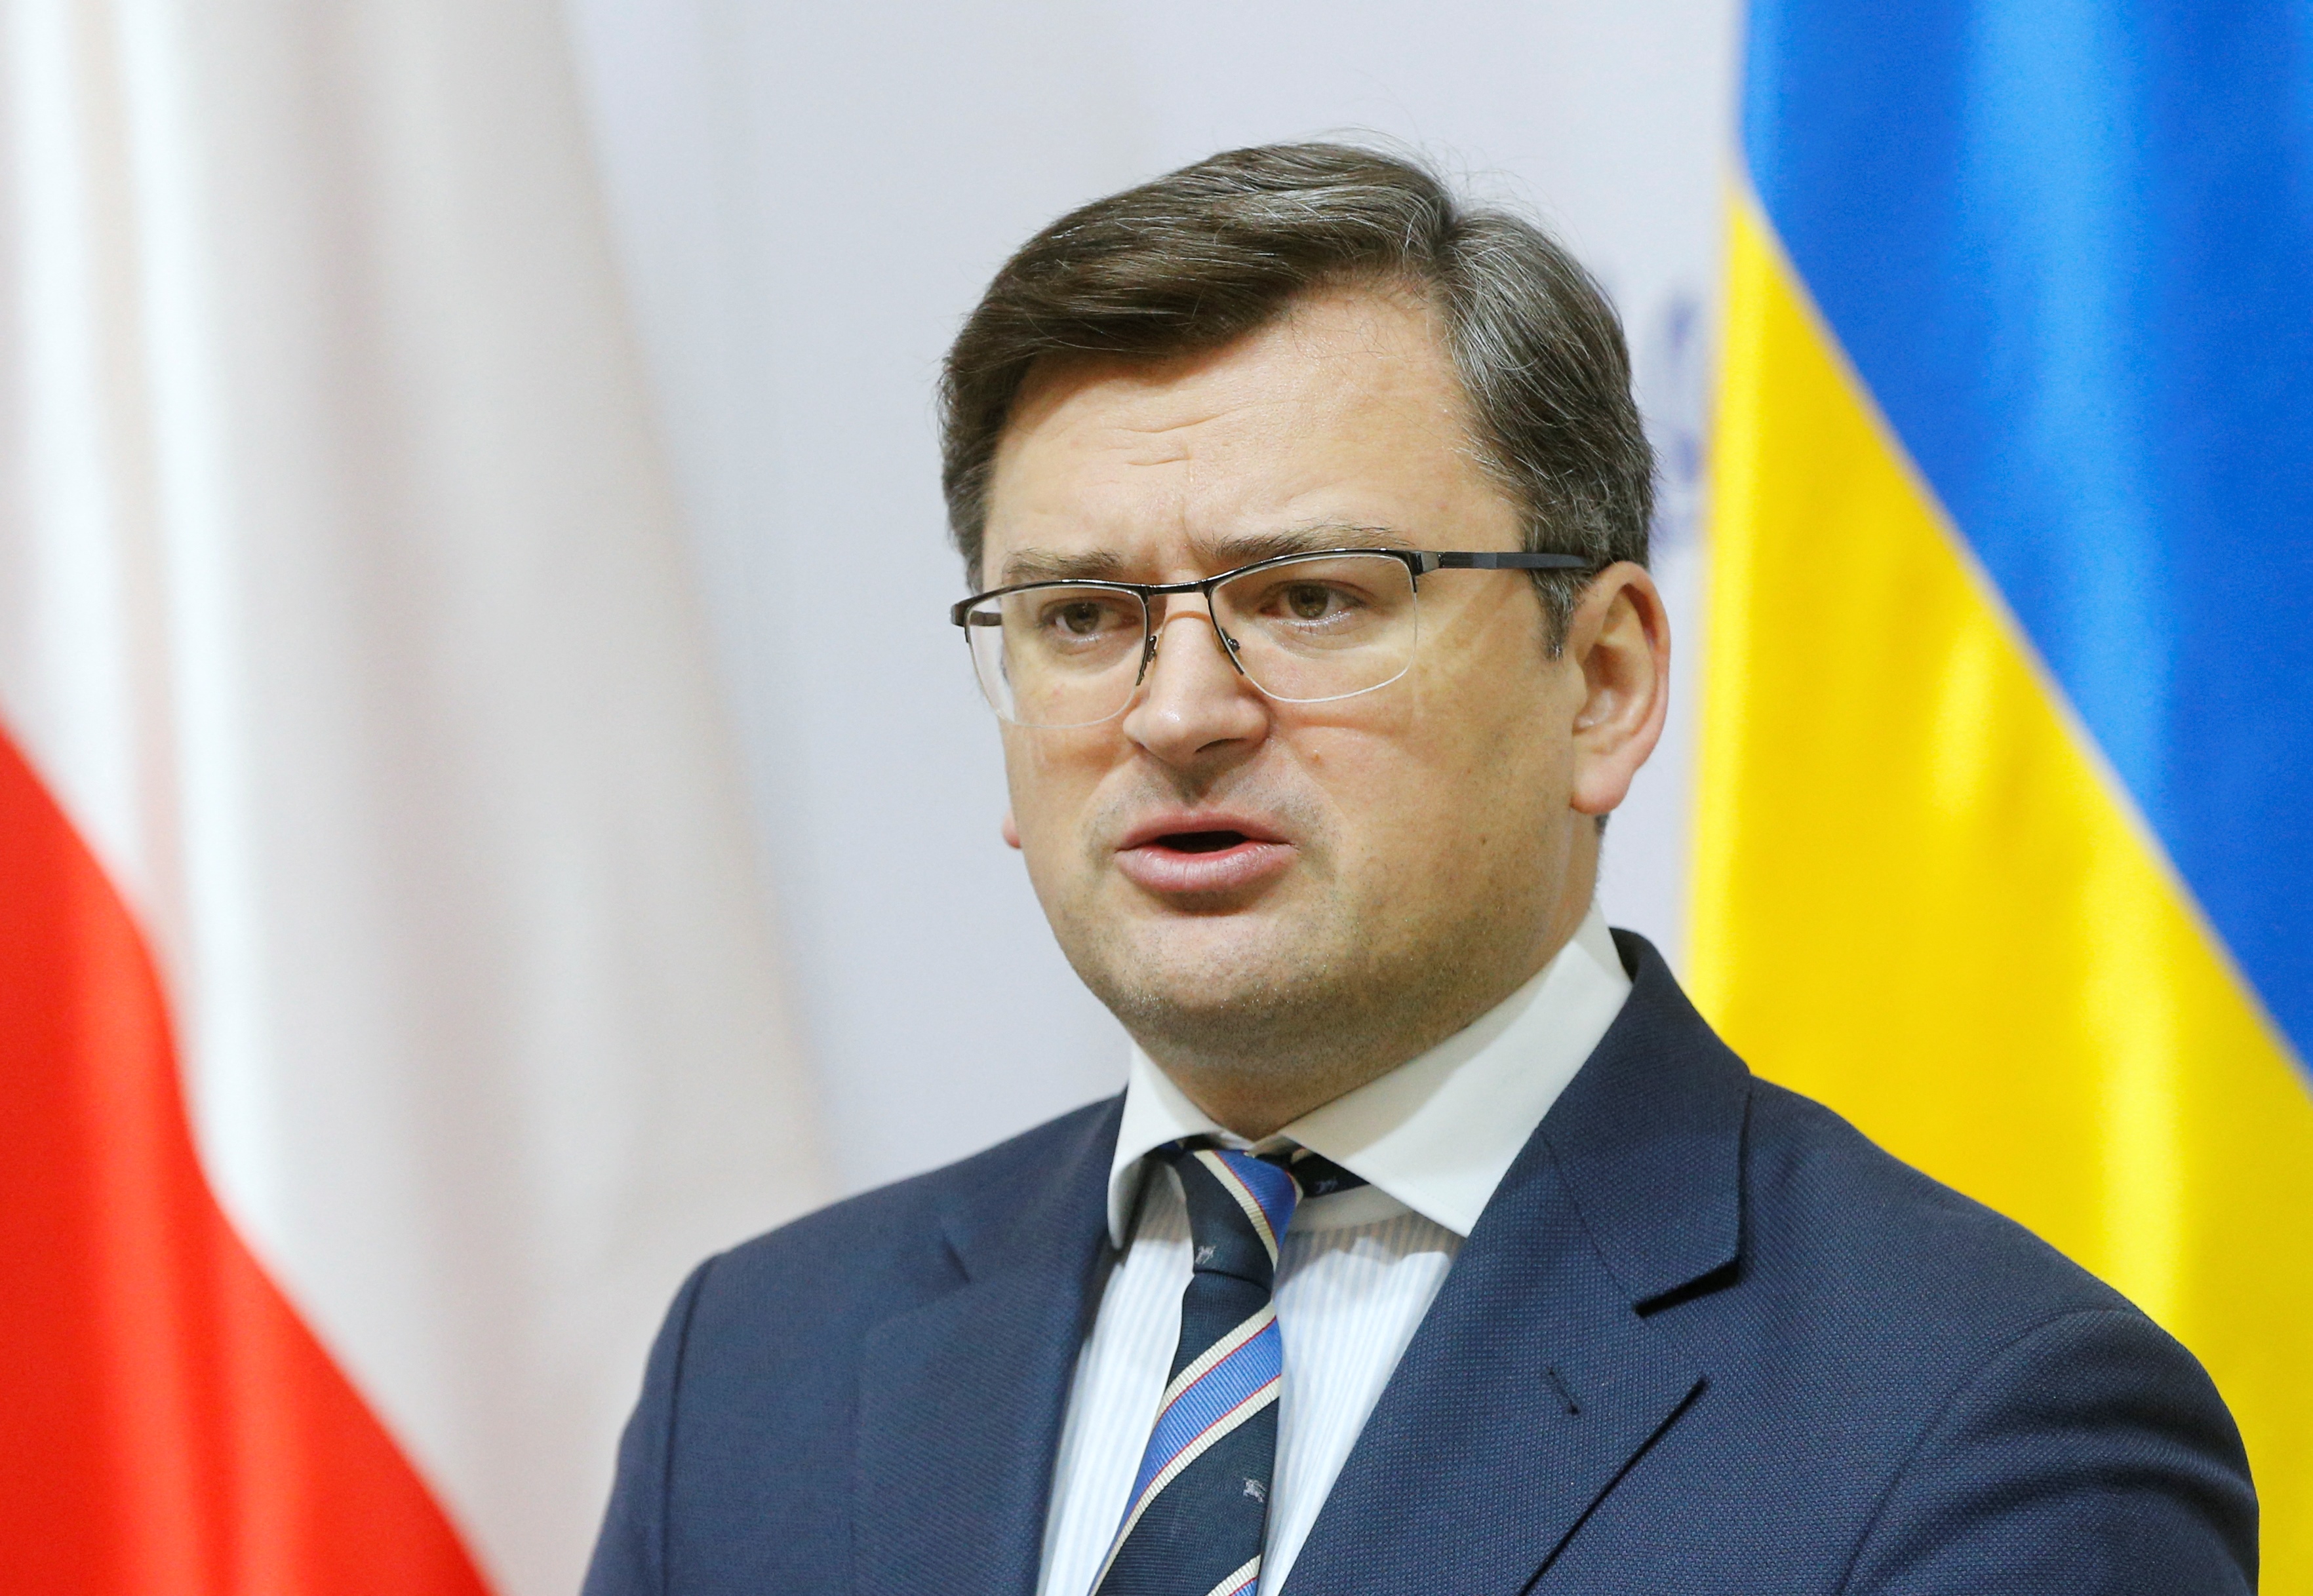 Ukraine's Foreign Minister Dmytro Kuleba gives a press conference following his meeting with OSCE Chairman-in-Office in Kyiv, Ukraine, on February 10.